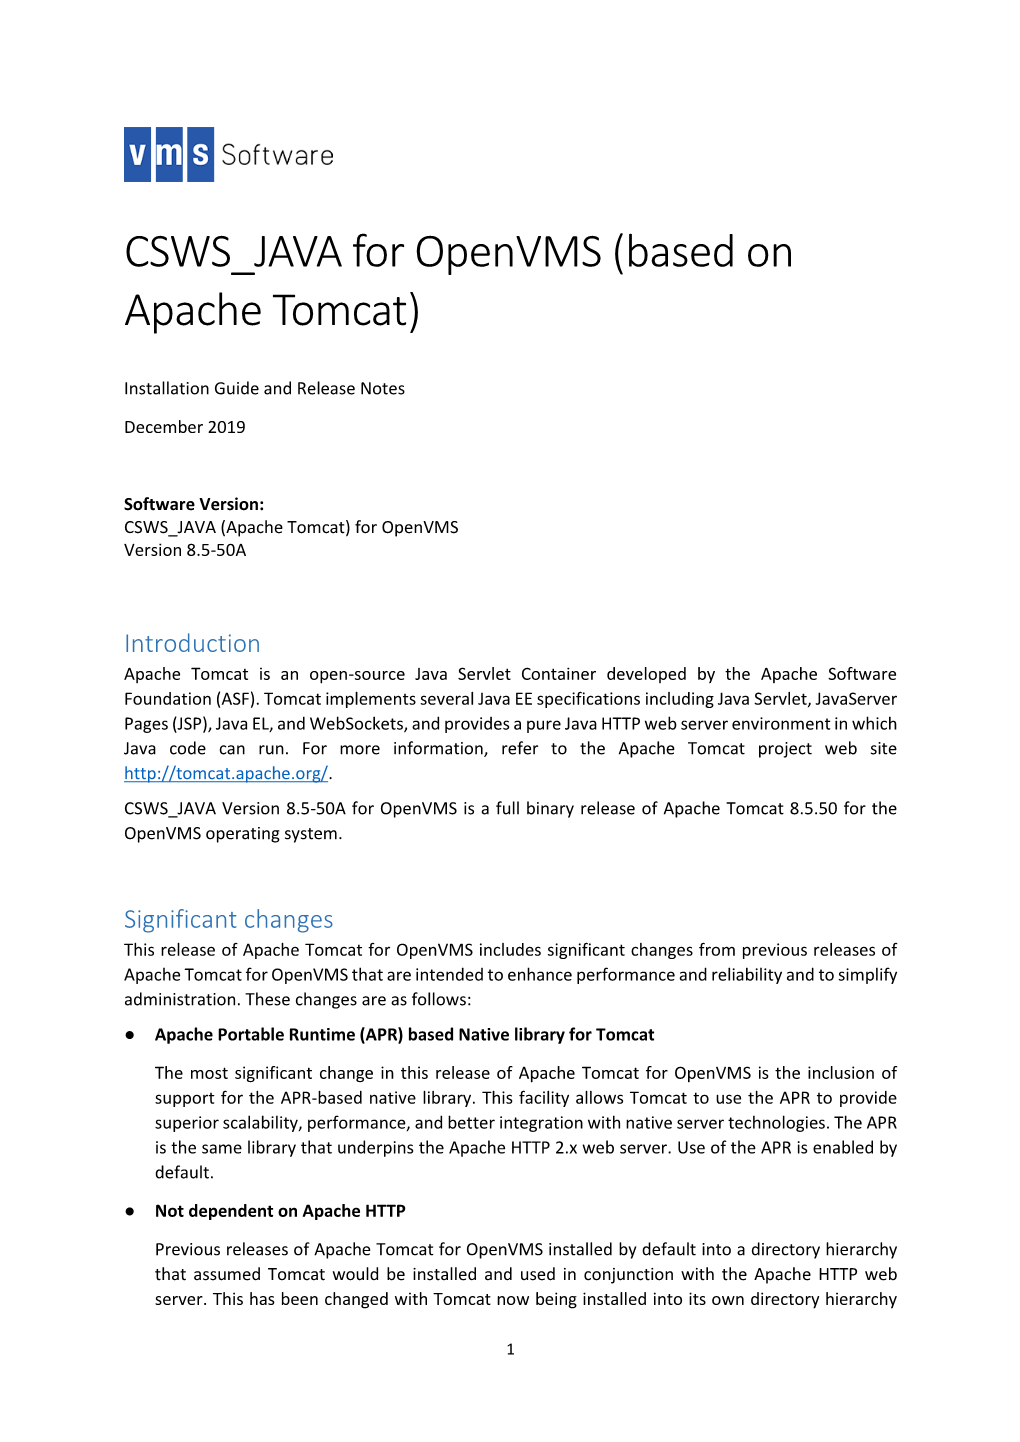 CSWS JAVA for Openvms (Based on Apache Tomcat)